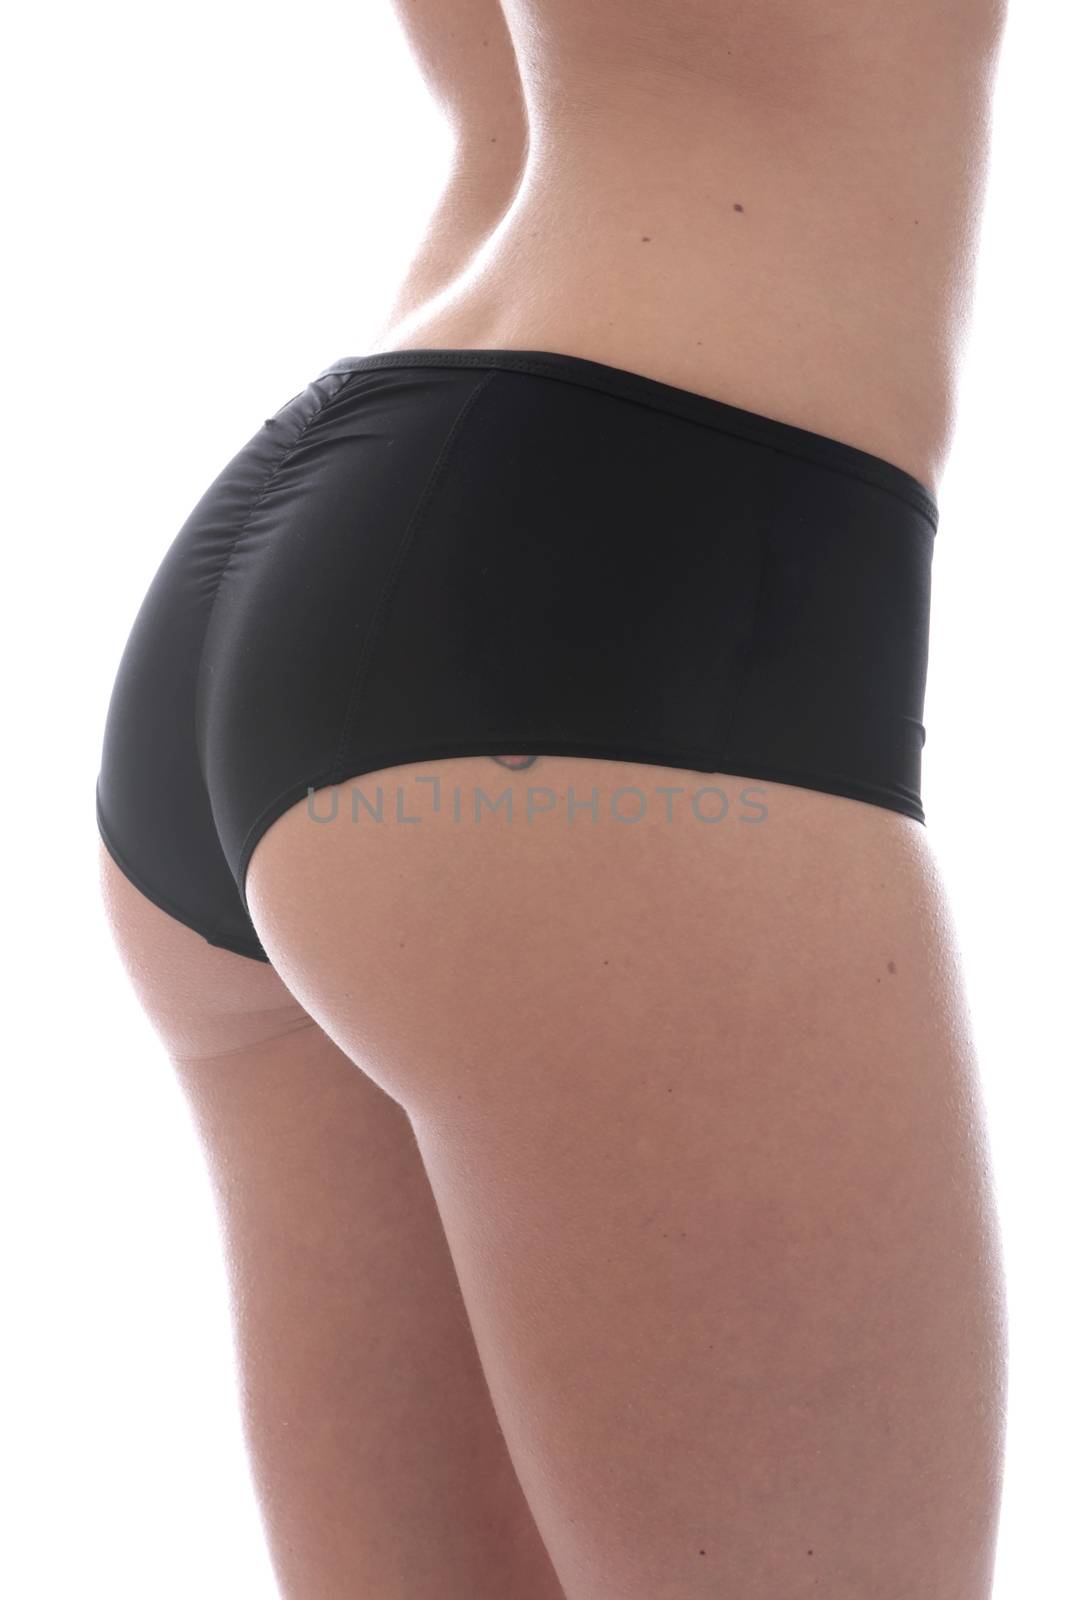 Model Released. Attractive Young Woman Wearing Sexy Black Panties by Whiteboxmedia